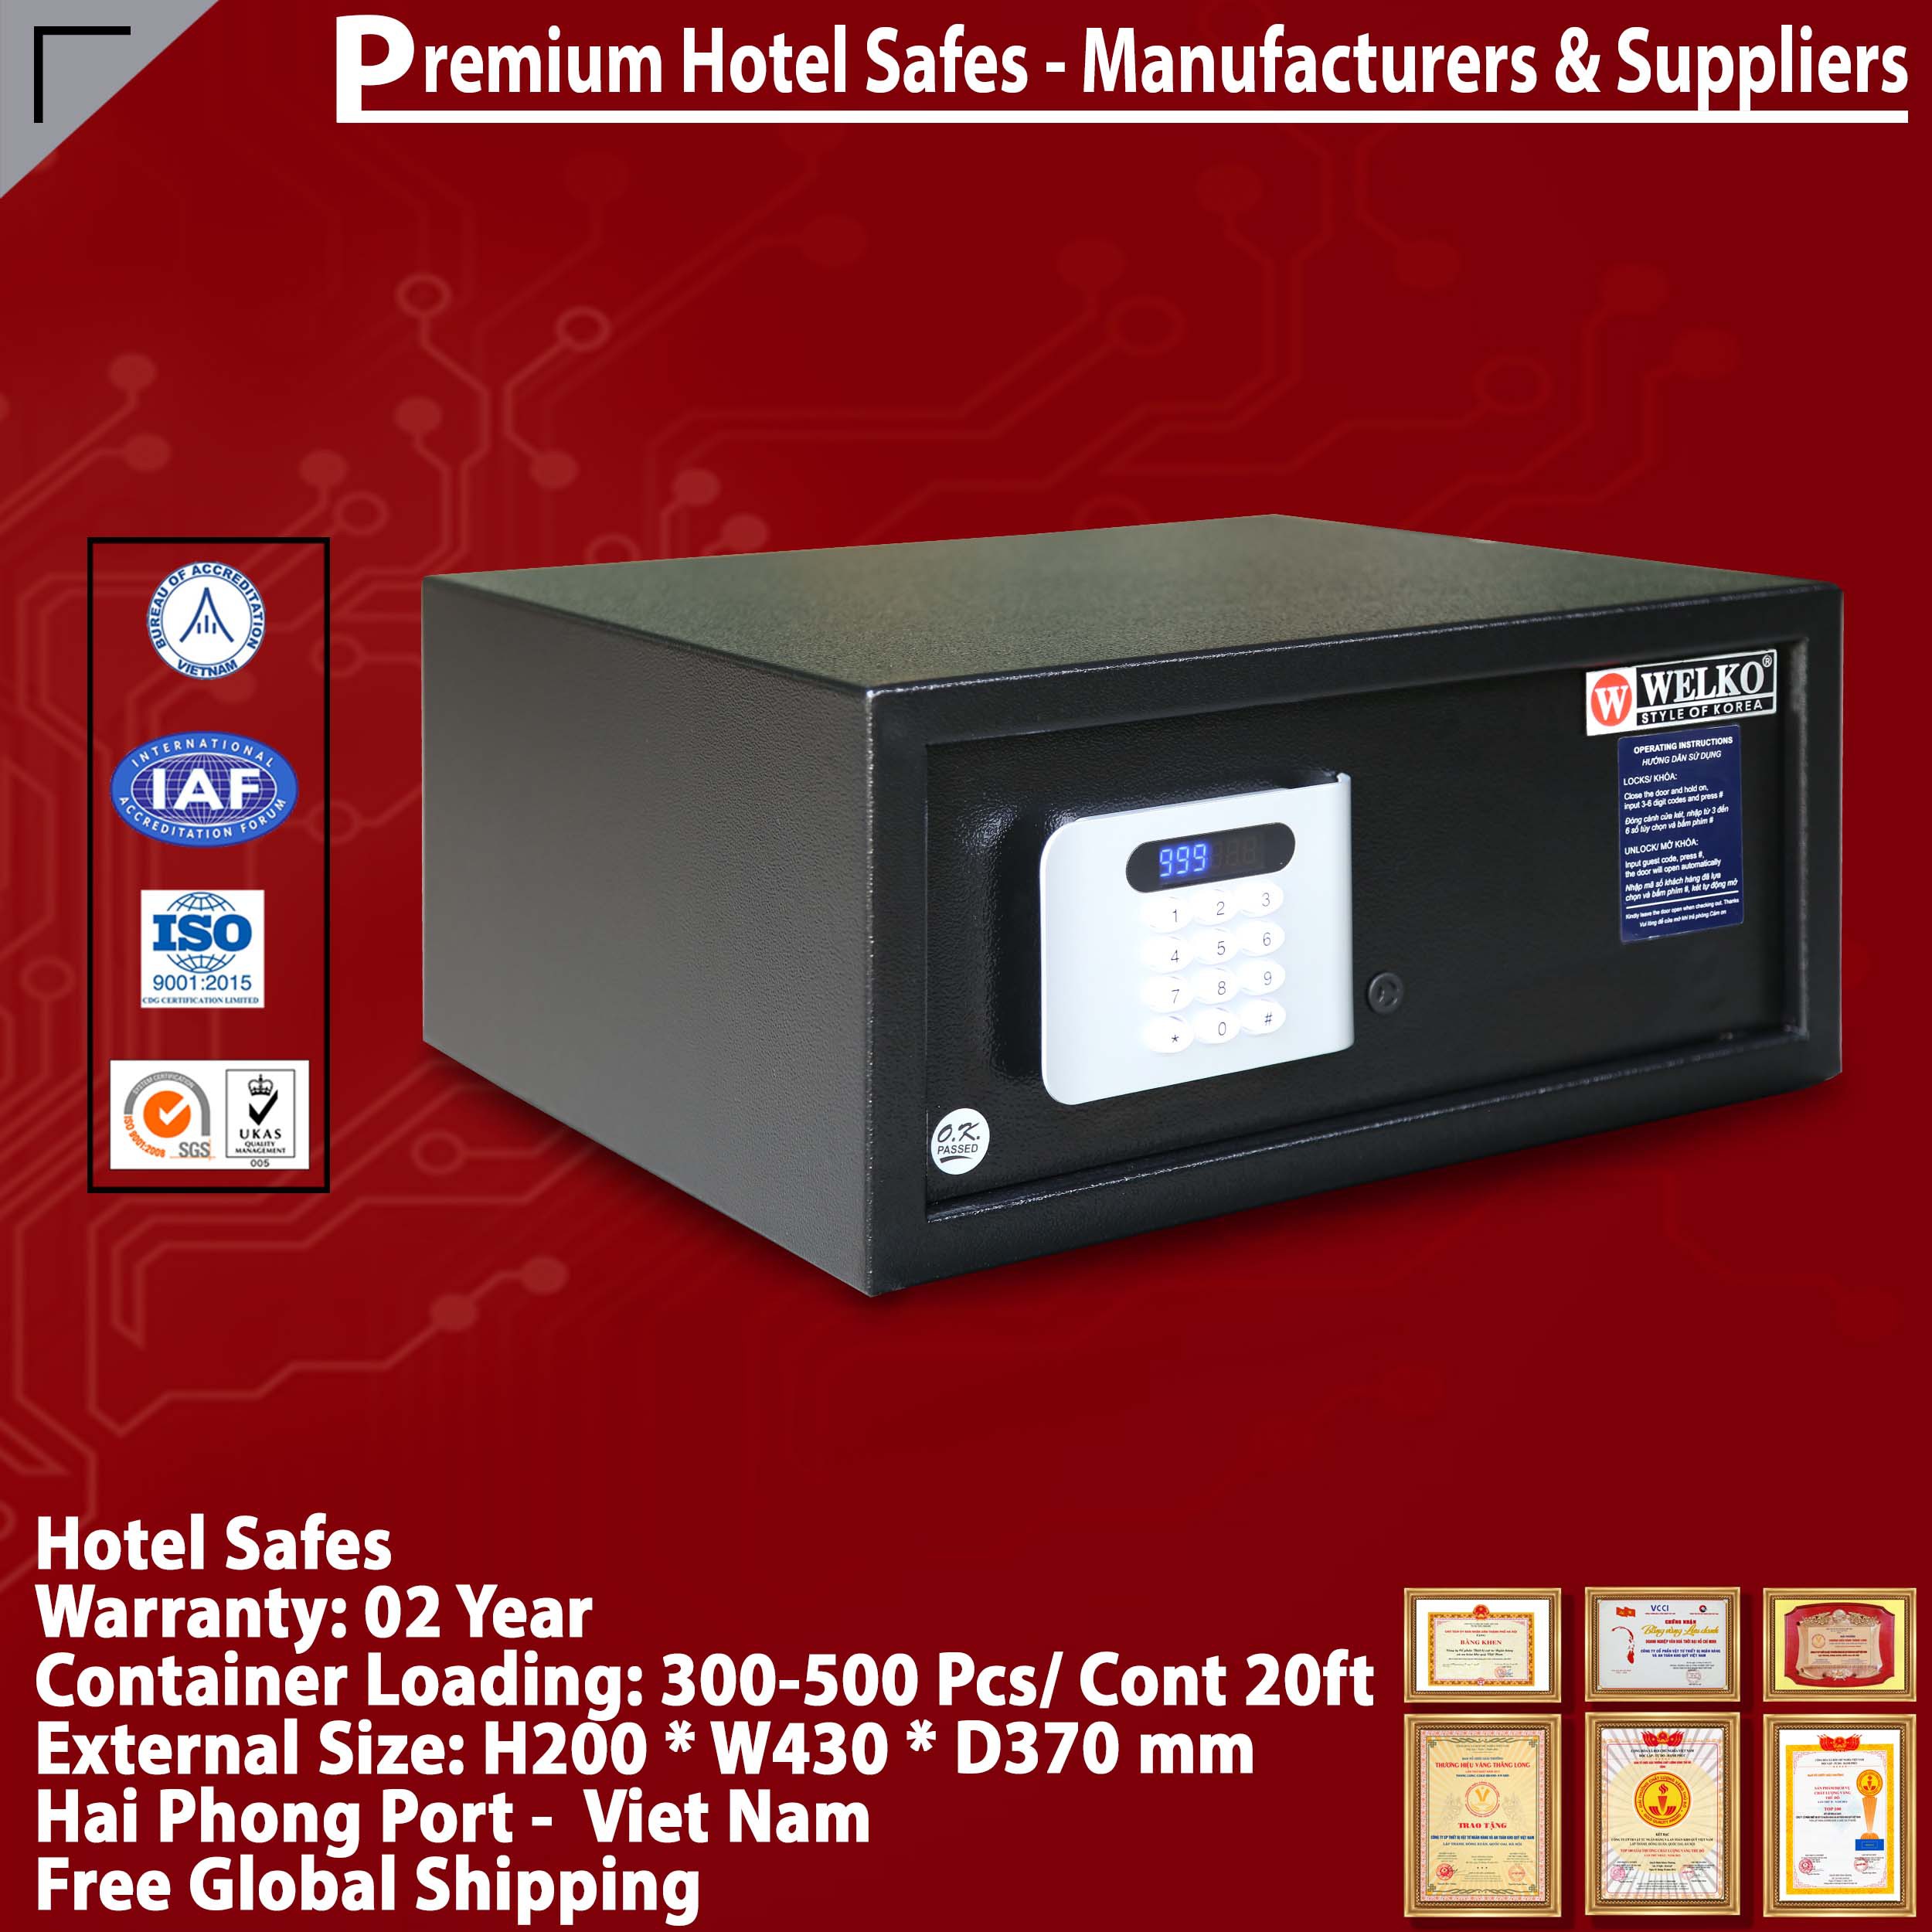 Hotel Safes Resort Manufacturing Facility